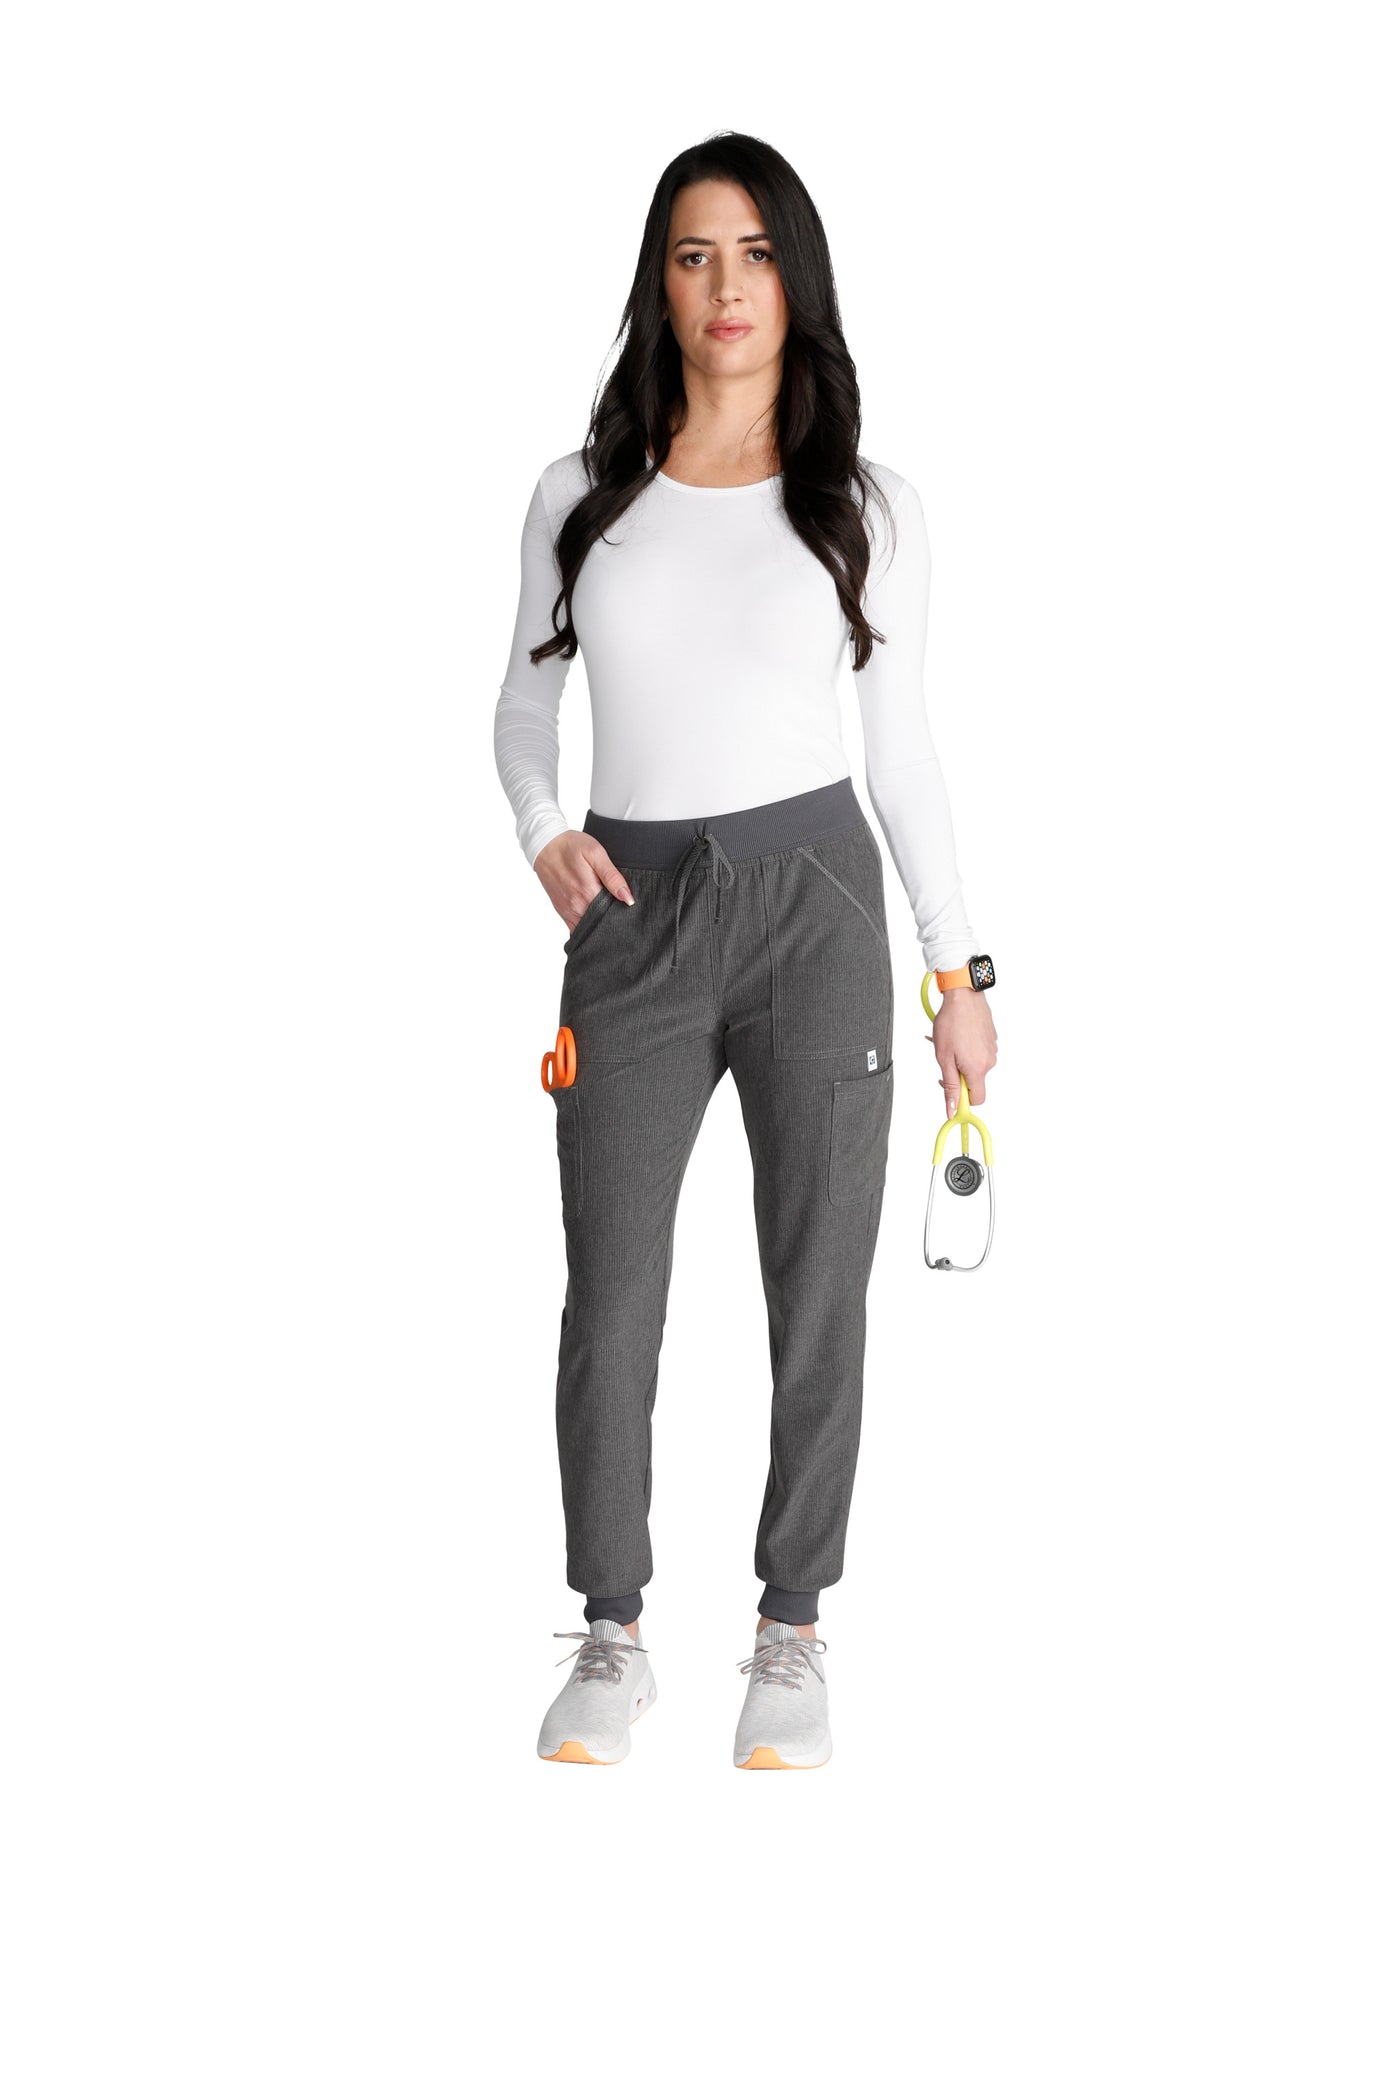 Heather Pewter - Cherokee By Cherokee Natural Rise Jogger Pant